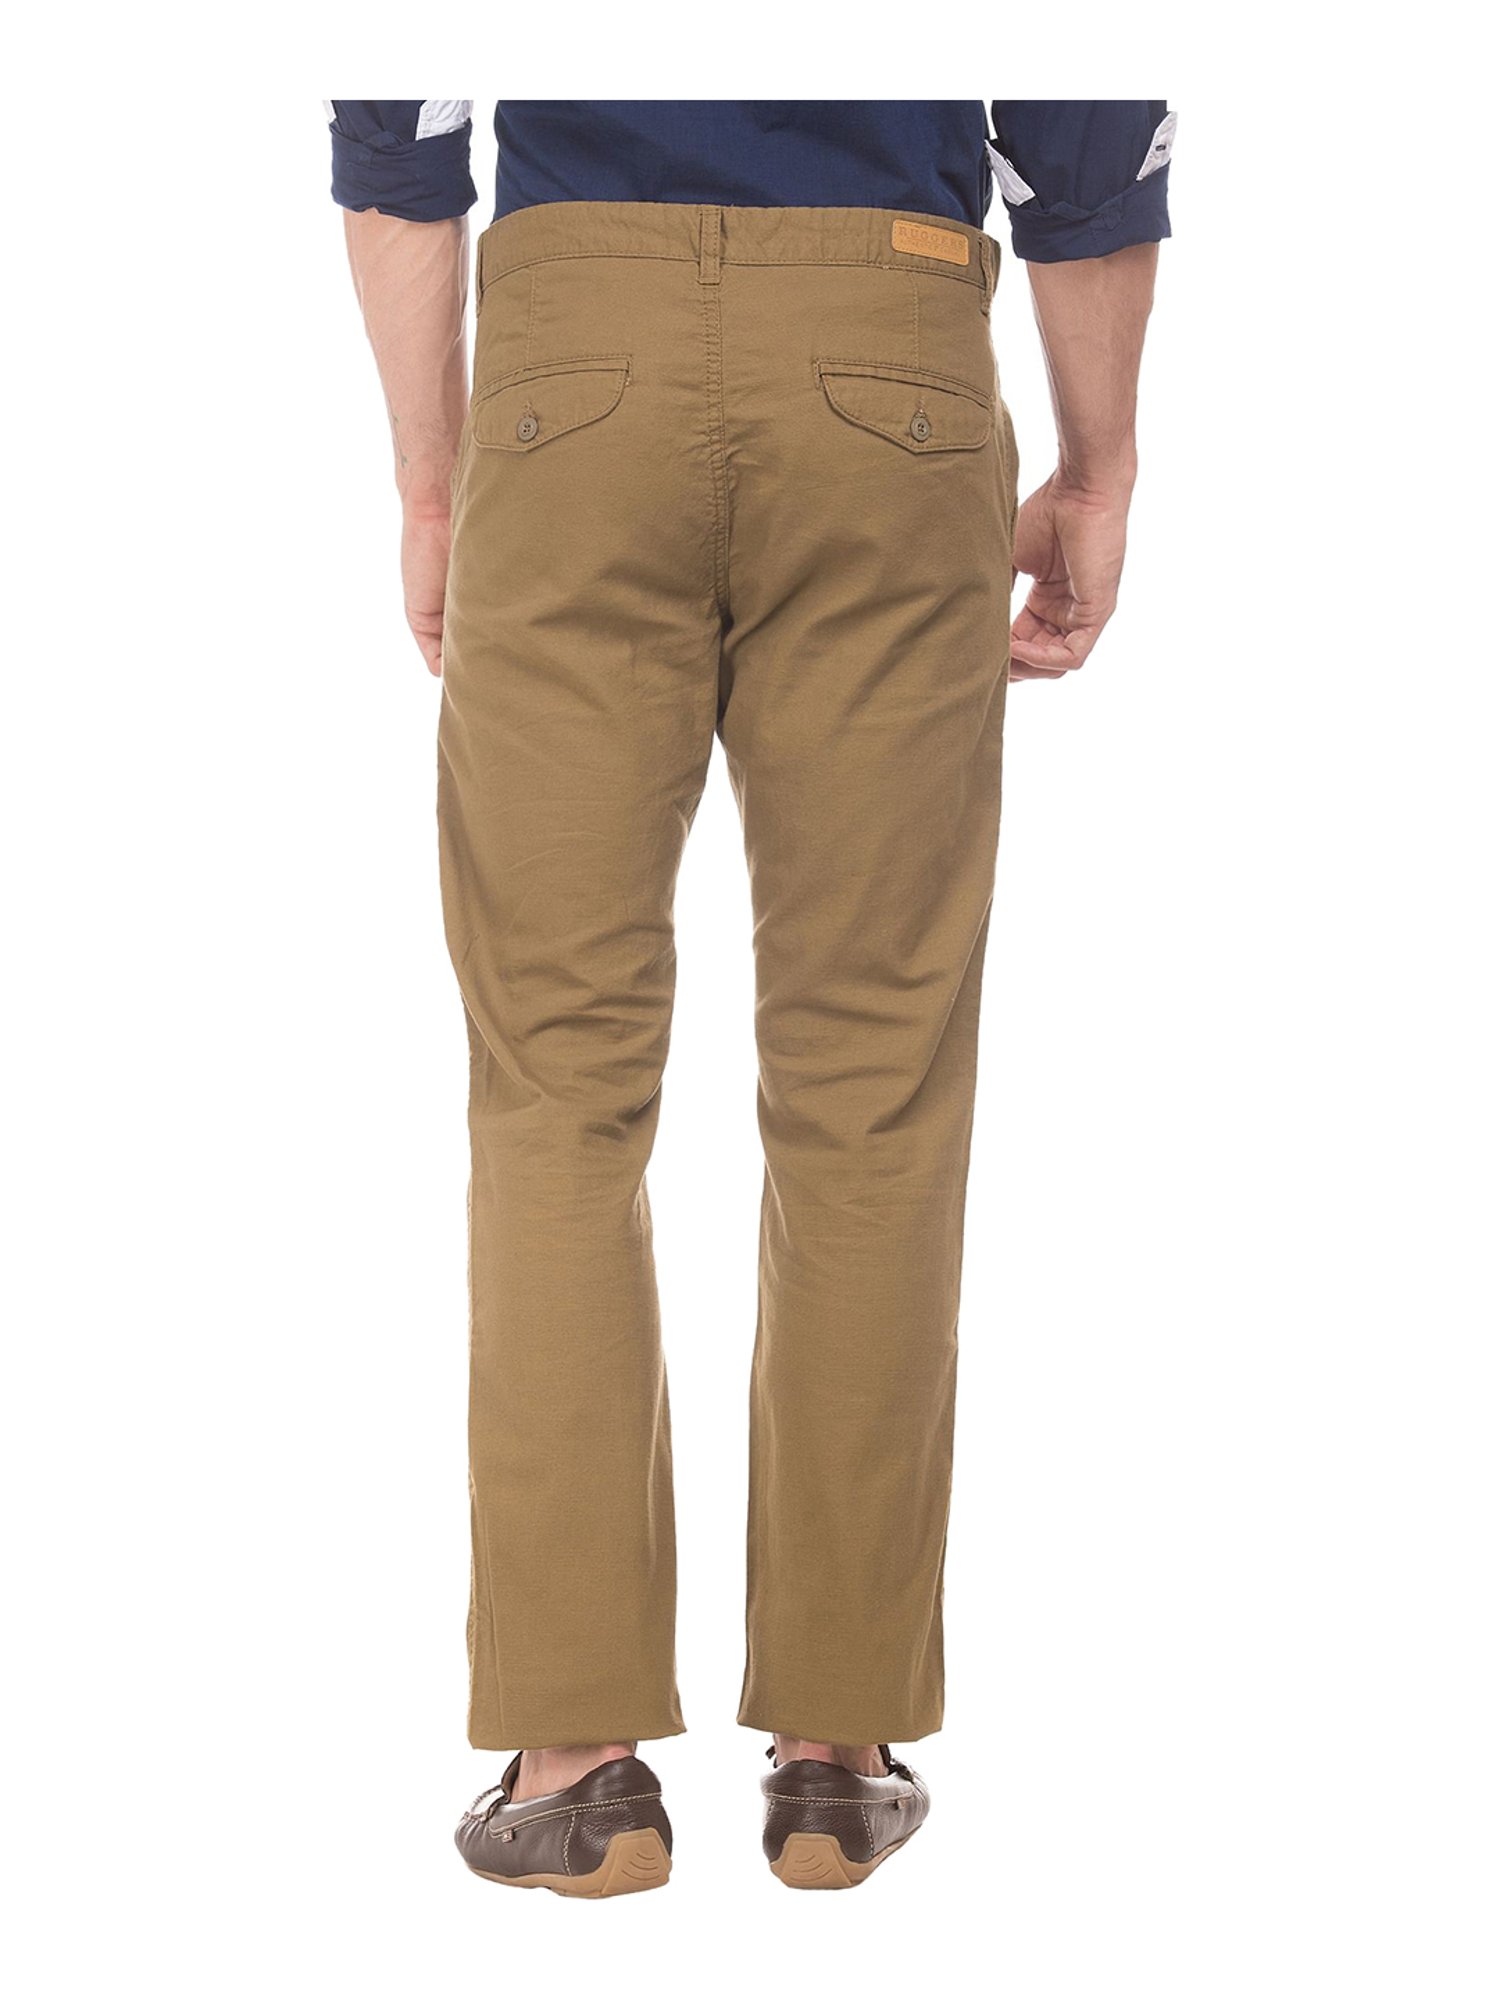 Ruggers Men's Casual Trouser (Brown) - 1 pc in Chennai at best price by  Trendy Girl Fashion Boutique - Justdial